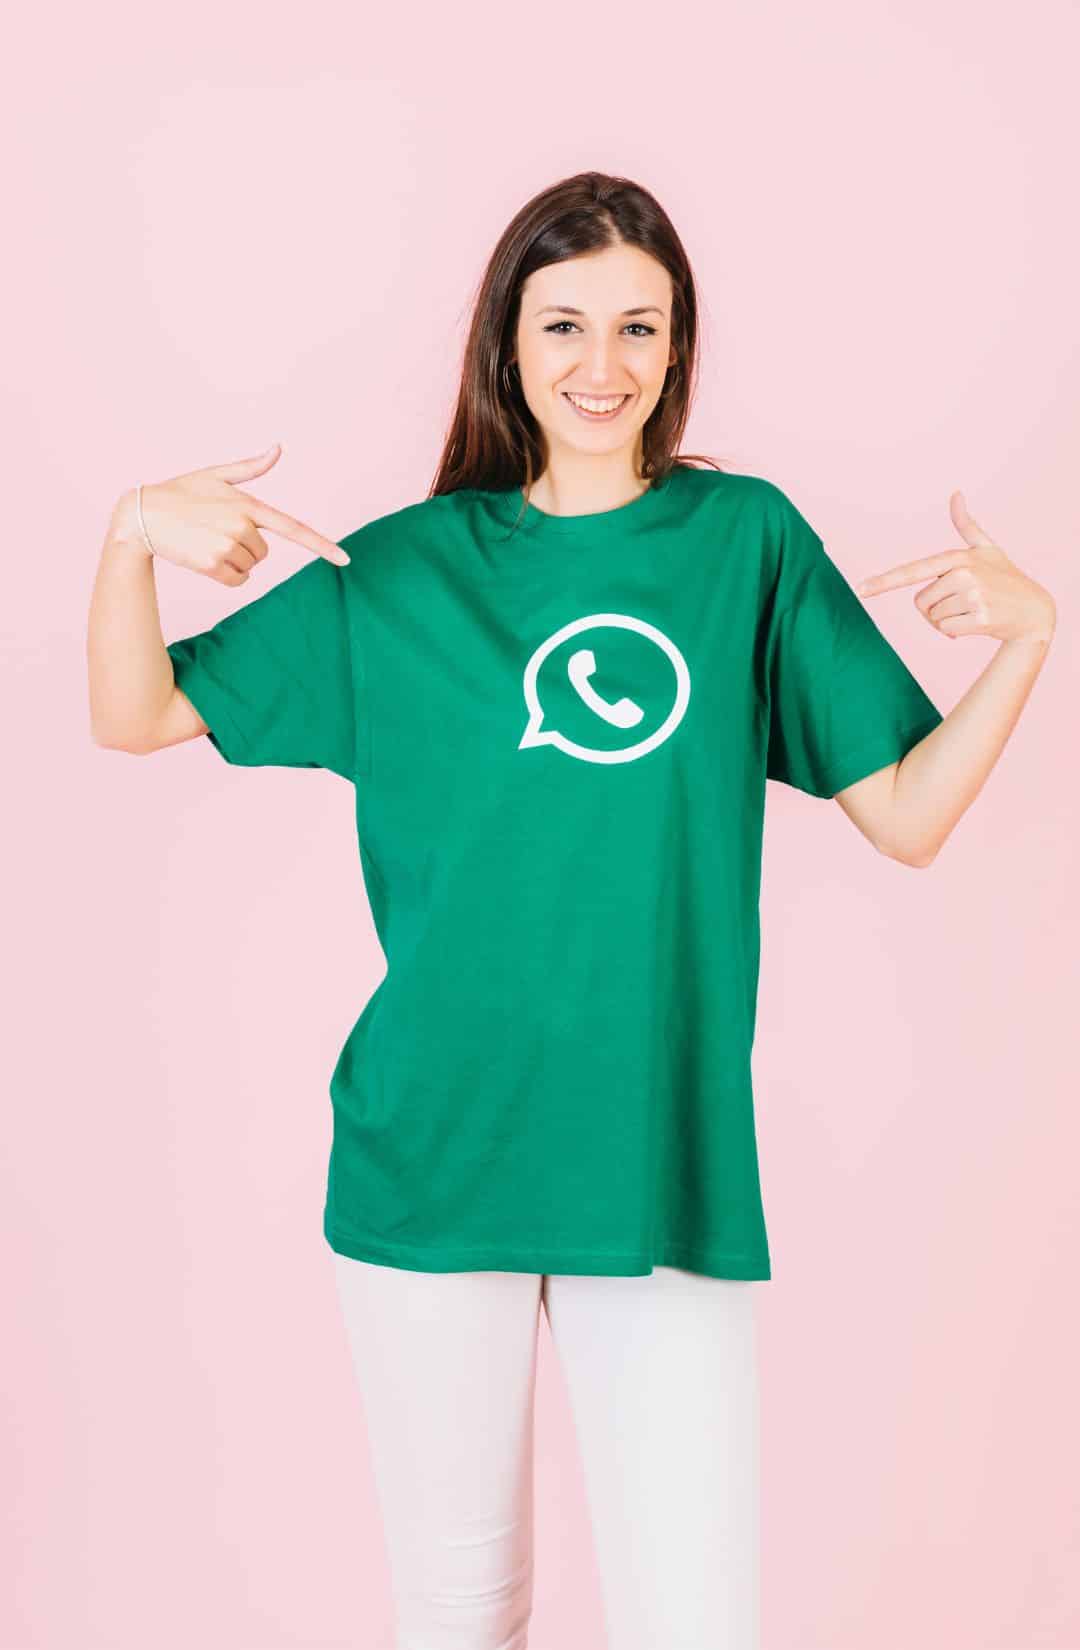 WhatsApp Marketing Strategies for Successful Business Campaigns in 2023